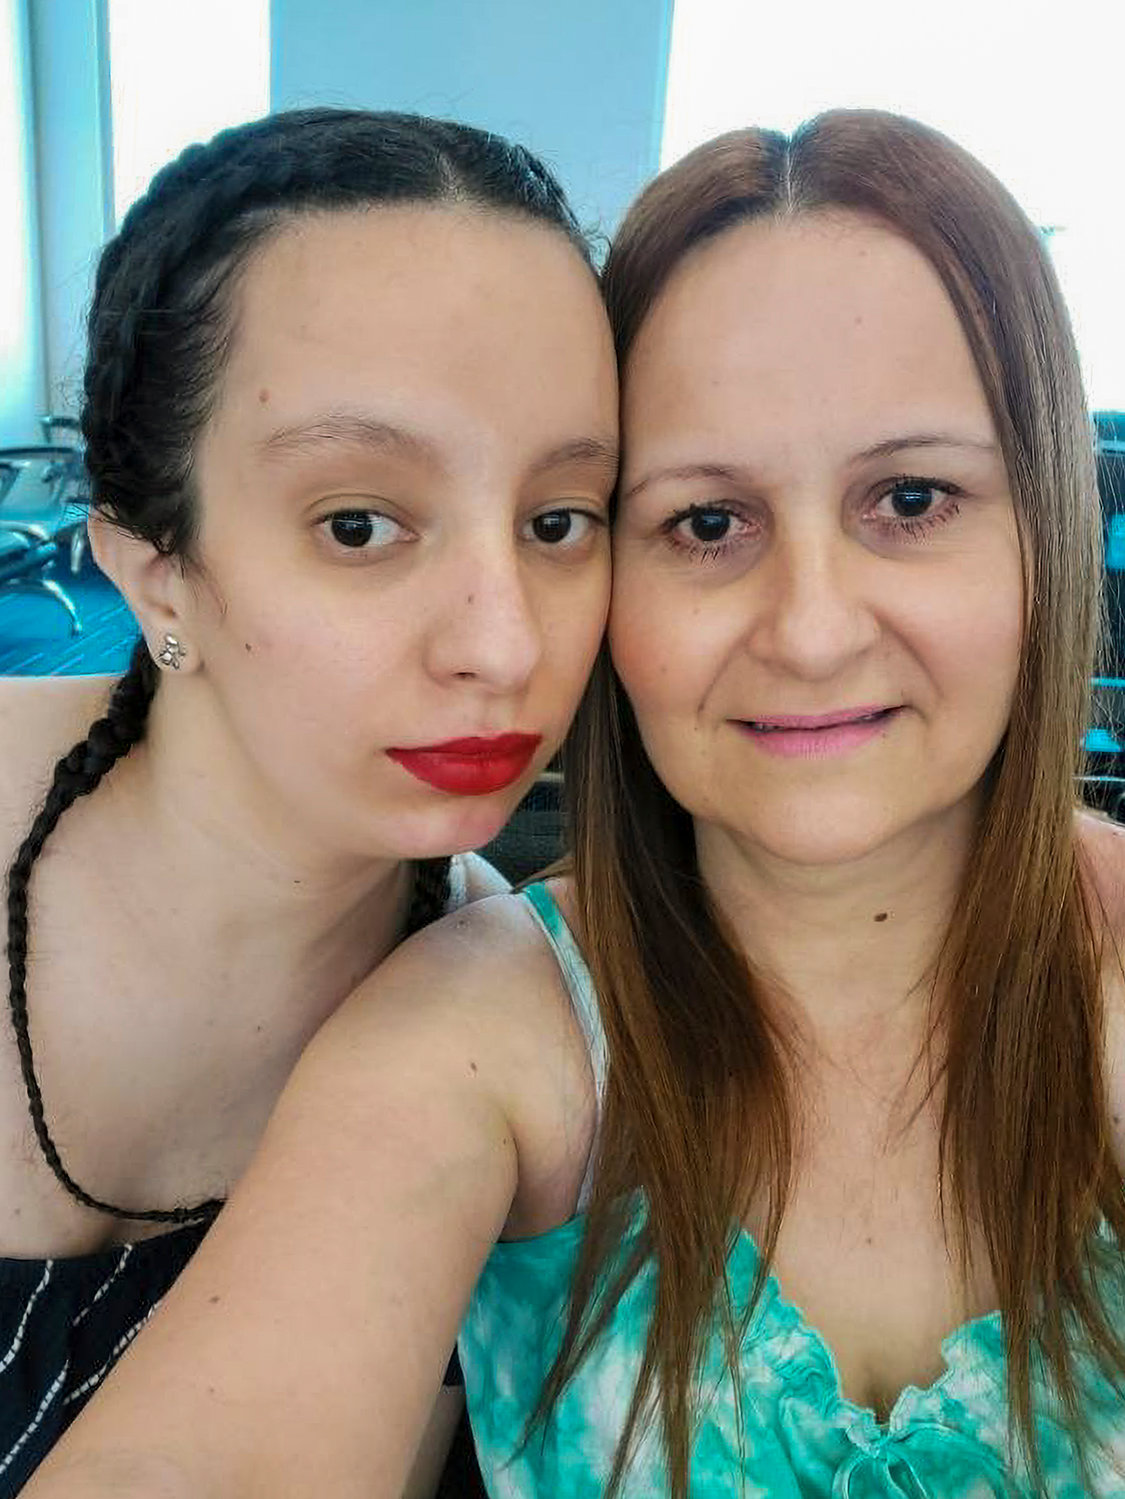 Janet Torres and her daughter still live in a women’s shelter in the Bronx after being displaced from their Puerto Rican home by Hurricane Maria four years ago. Torres hopes the city can help her find a place to live that’s compatible with her daughter’s special needs.